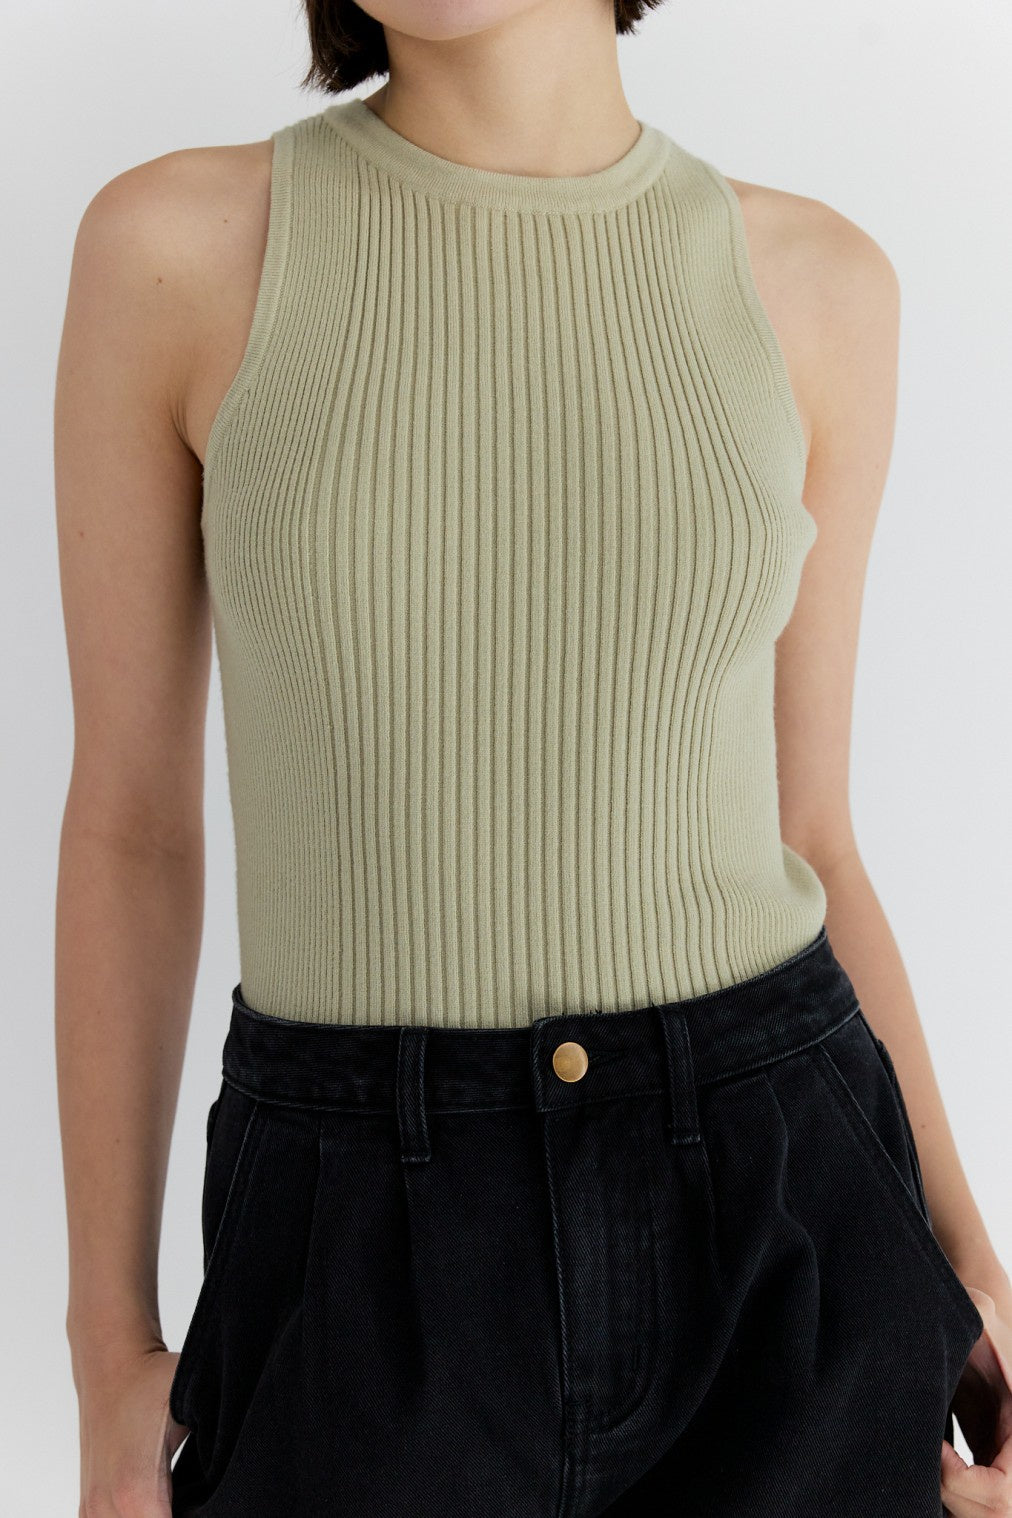 The Brie Ribbed High Neck Top